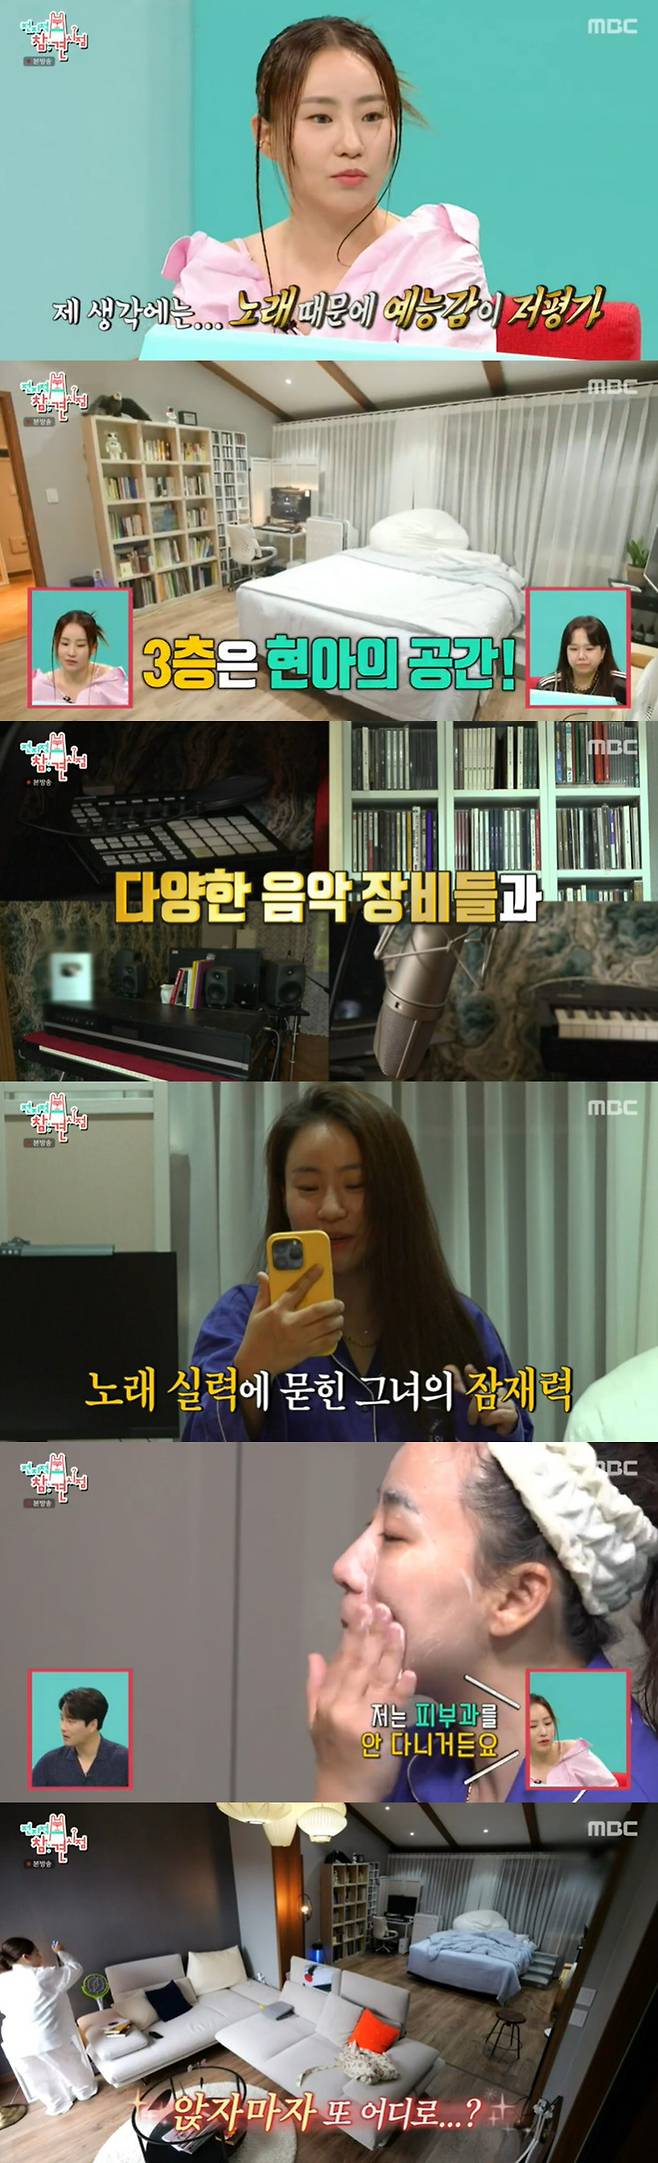 Point of Omniscient Interfere Jo Hyun Ah unveiled his magnificent Namyangju home.On the 12th MBC entertainment program Point of Omniscient Interferee, the daily life of singer Jo Hyun Ah was revealed.Jo Hyun Ah opened his eyes in a spacious bedroom. Jo Hyun Ah was staying with his family at his home in Namyangju, which was called up to 5,000 pyeong. The second floor was used by his family and the third floor was Jo Hyun Ahs space.On one side of the bedroom was a sofa space, and on the other side of the living room was a studio and a photographer of Thursday Night of Jo Hyun Ah.Jo Hyun Ahs 10-year-old manager said, Jo Hyun Ah likes to meet people and is a superb E.I have never seen a house, but I want to look at it. After the video call, Jo Hyun Ah carefully washed his face. Yang said, You value your skin very much, and Jo Hyun Ah said, I dont go to a dermatologist. The skin care is not over.Jo Hyun Ah said, I apply a lot of sunscreen. I applied sunscreen to my face and constantly muttered and finished self-skin care.